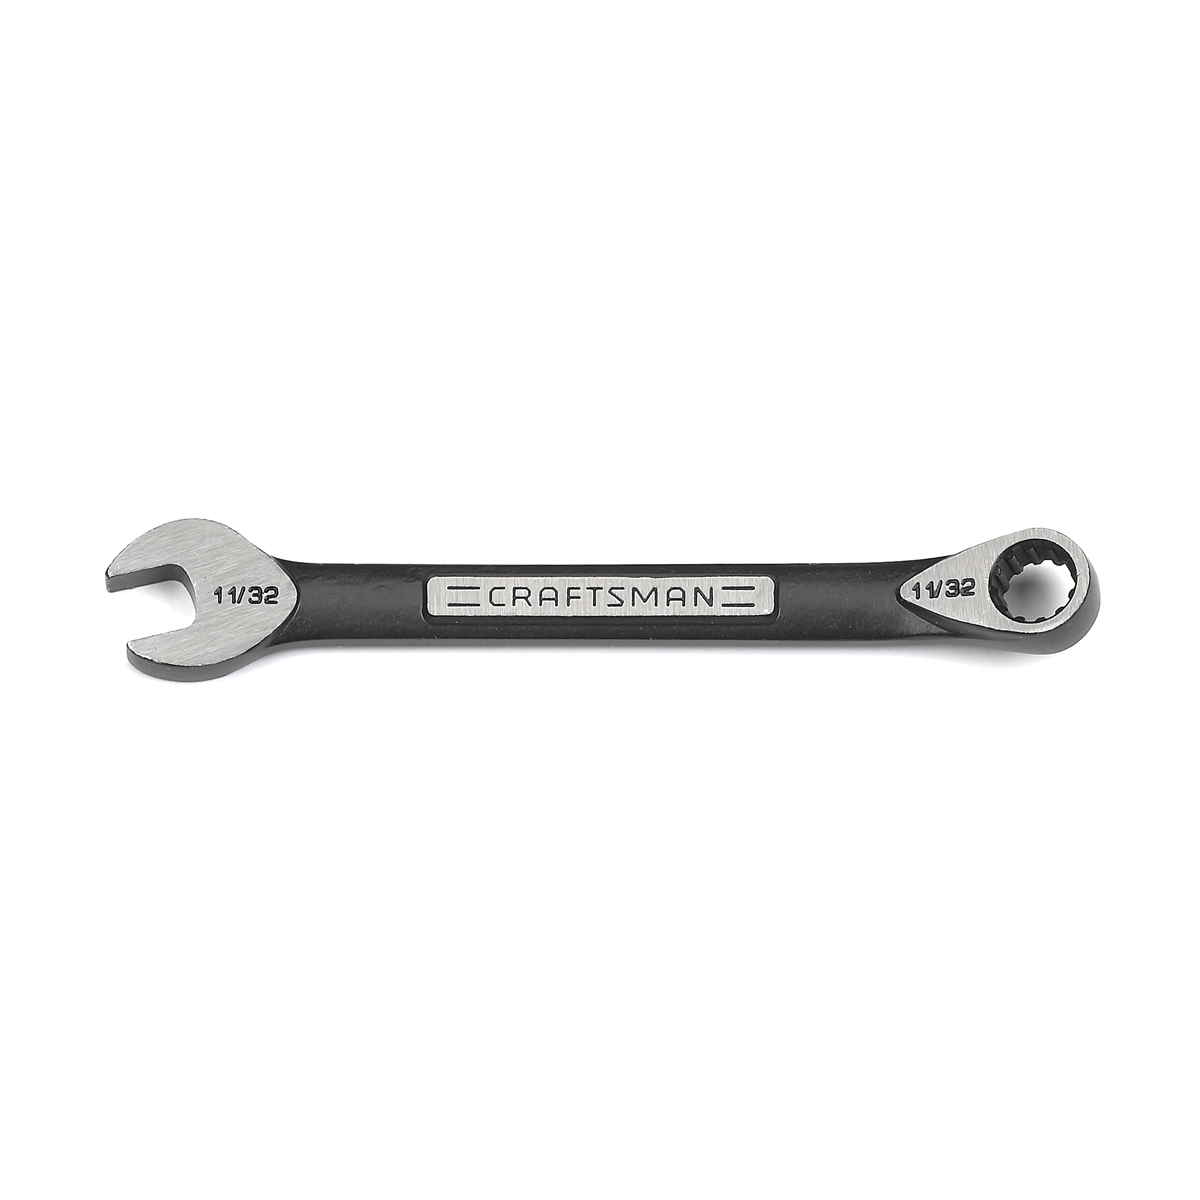 Craftsman 11/32" Universal Combination Wrench